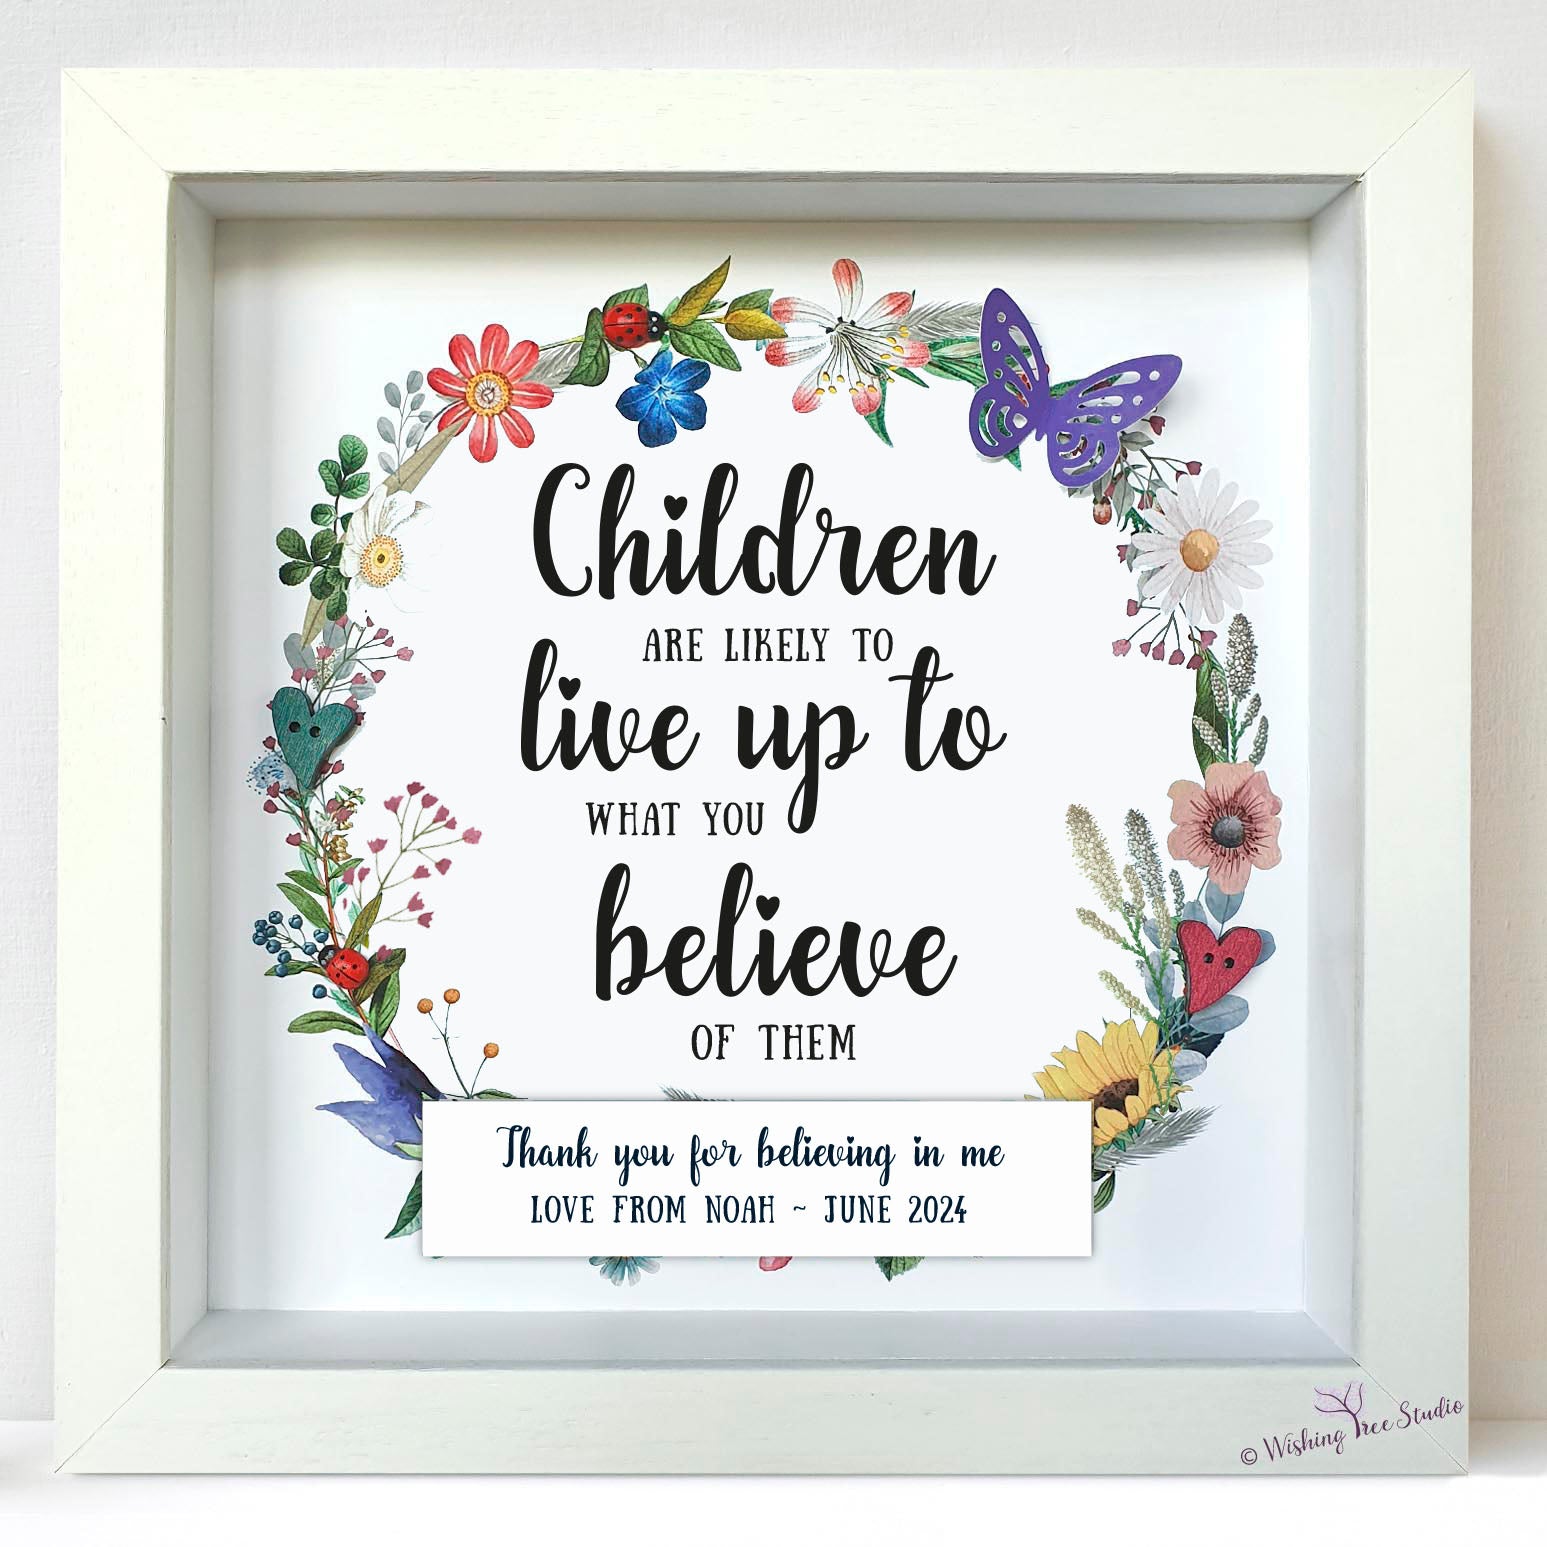 Children are likely to live up to what you believe of them